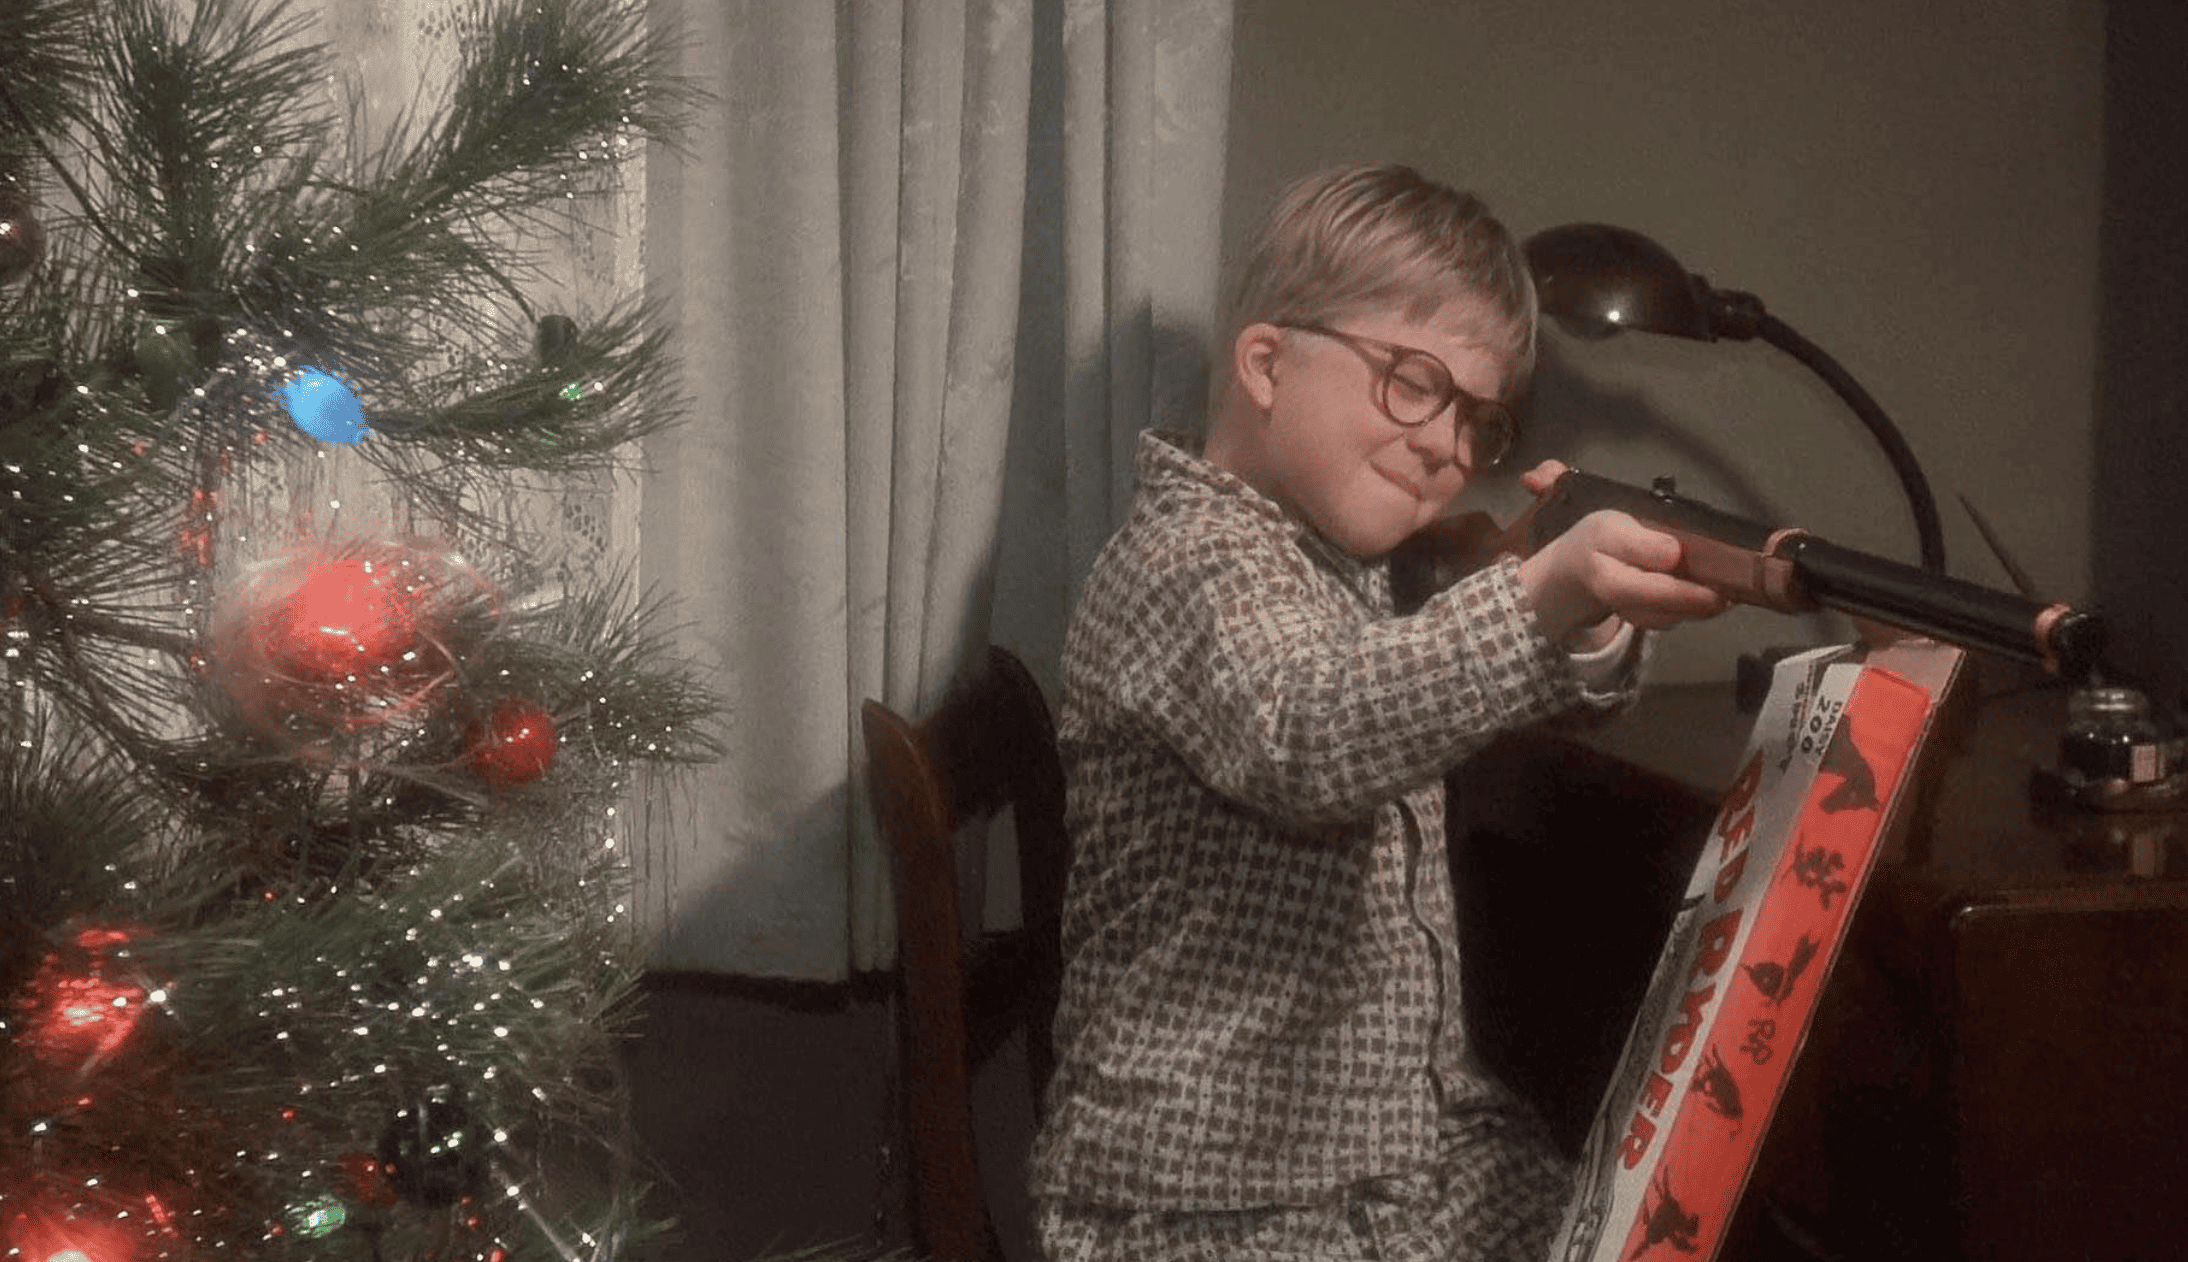 A young boy at Christmas in this image from Metro-Goldwyn-Mayer